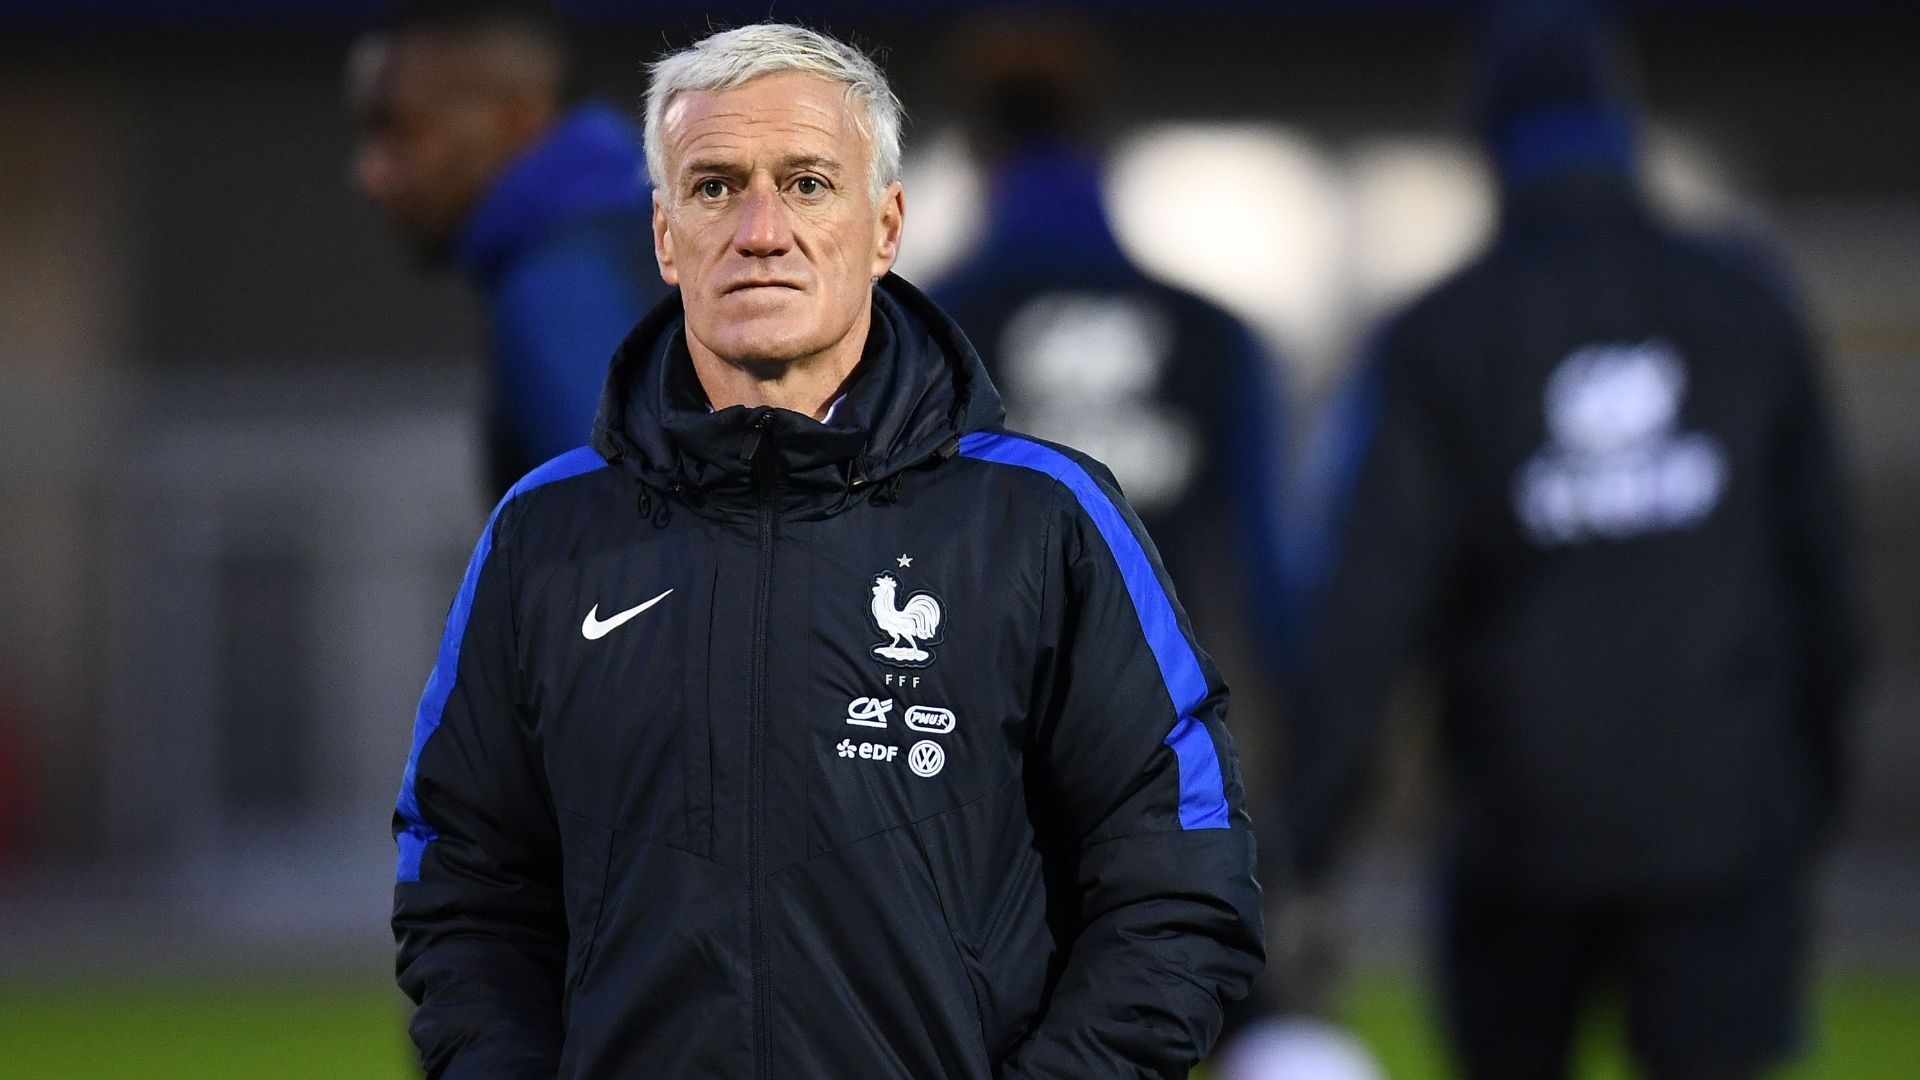 didier-deschamps-has-choices-to-make-needs-paul-pogba-to-find-form-1-273b859ba9860acffeee8d7a7adcaa21.jpg